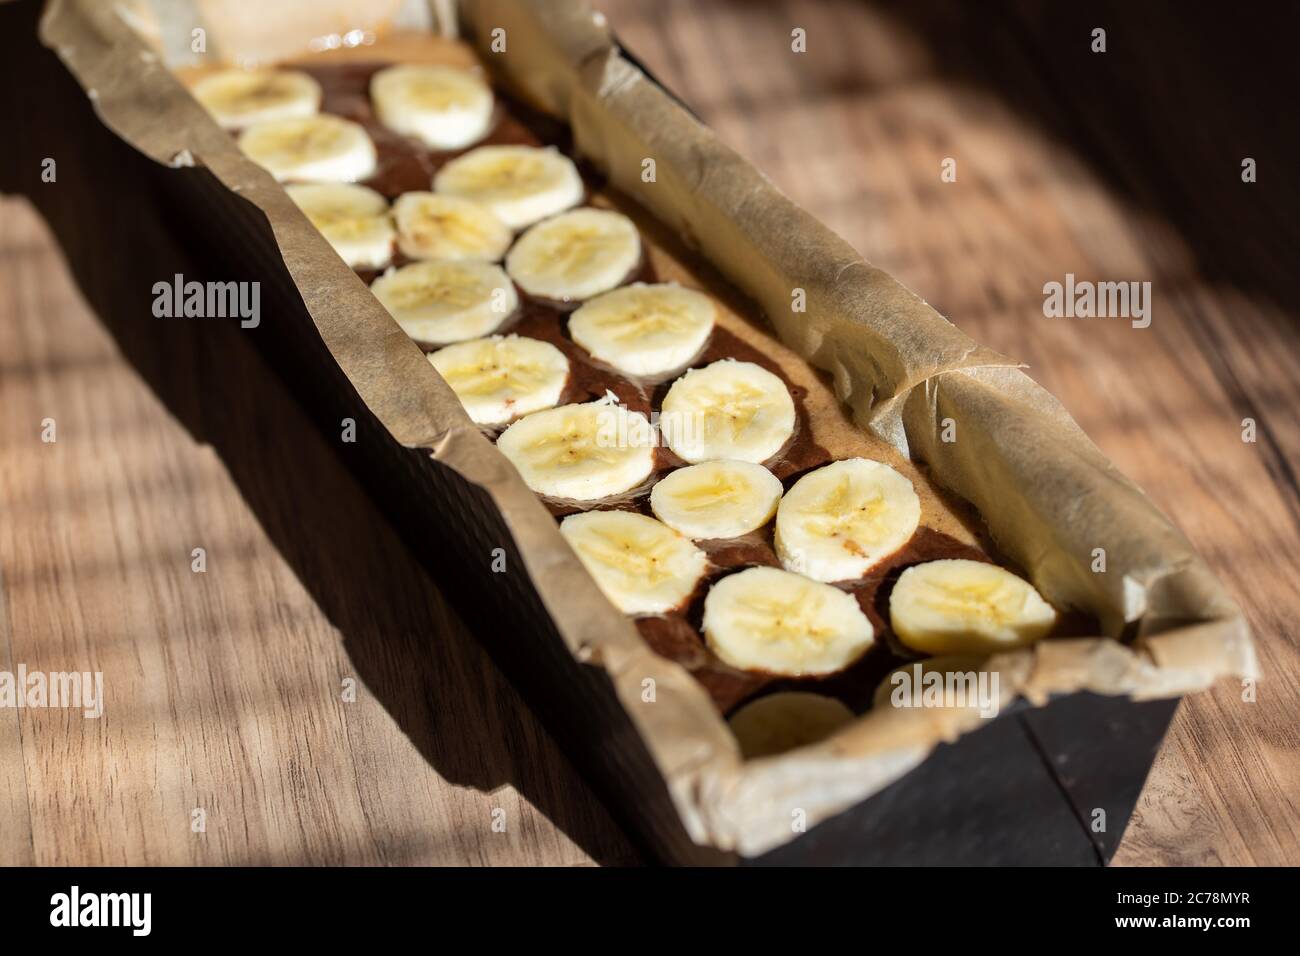 Baking form filled with banana bread dough. Cutted banana on top. Stock Photo